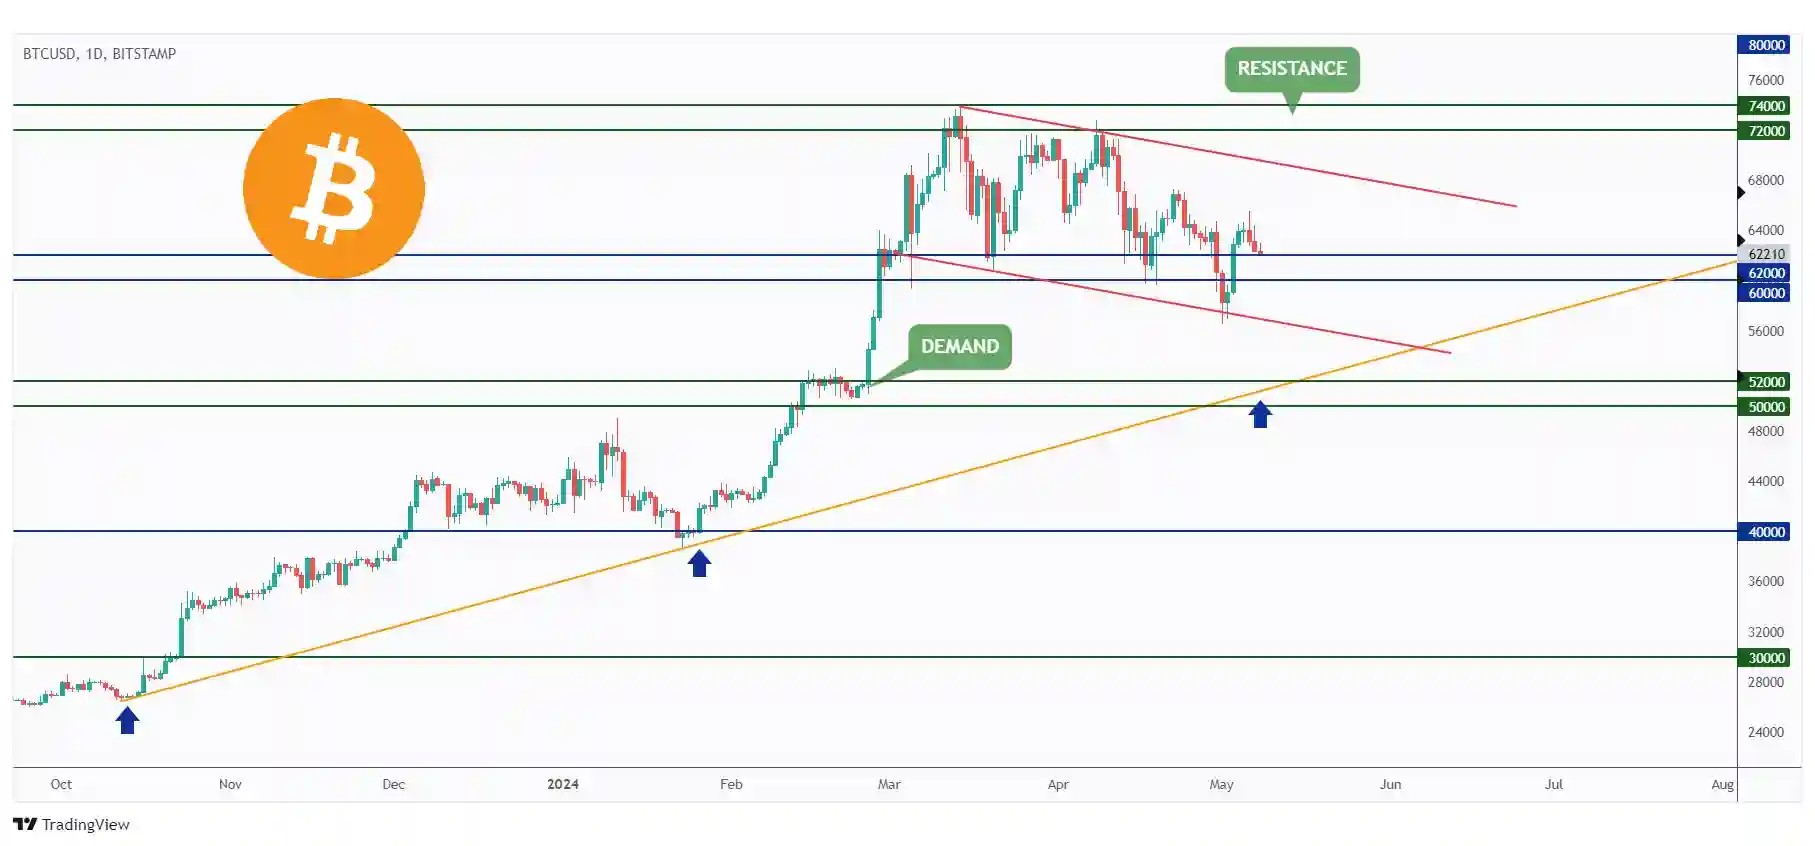 BTC daily chart retesting the $60,000 - $62,000 support zone again.